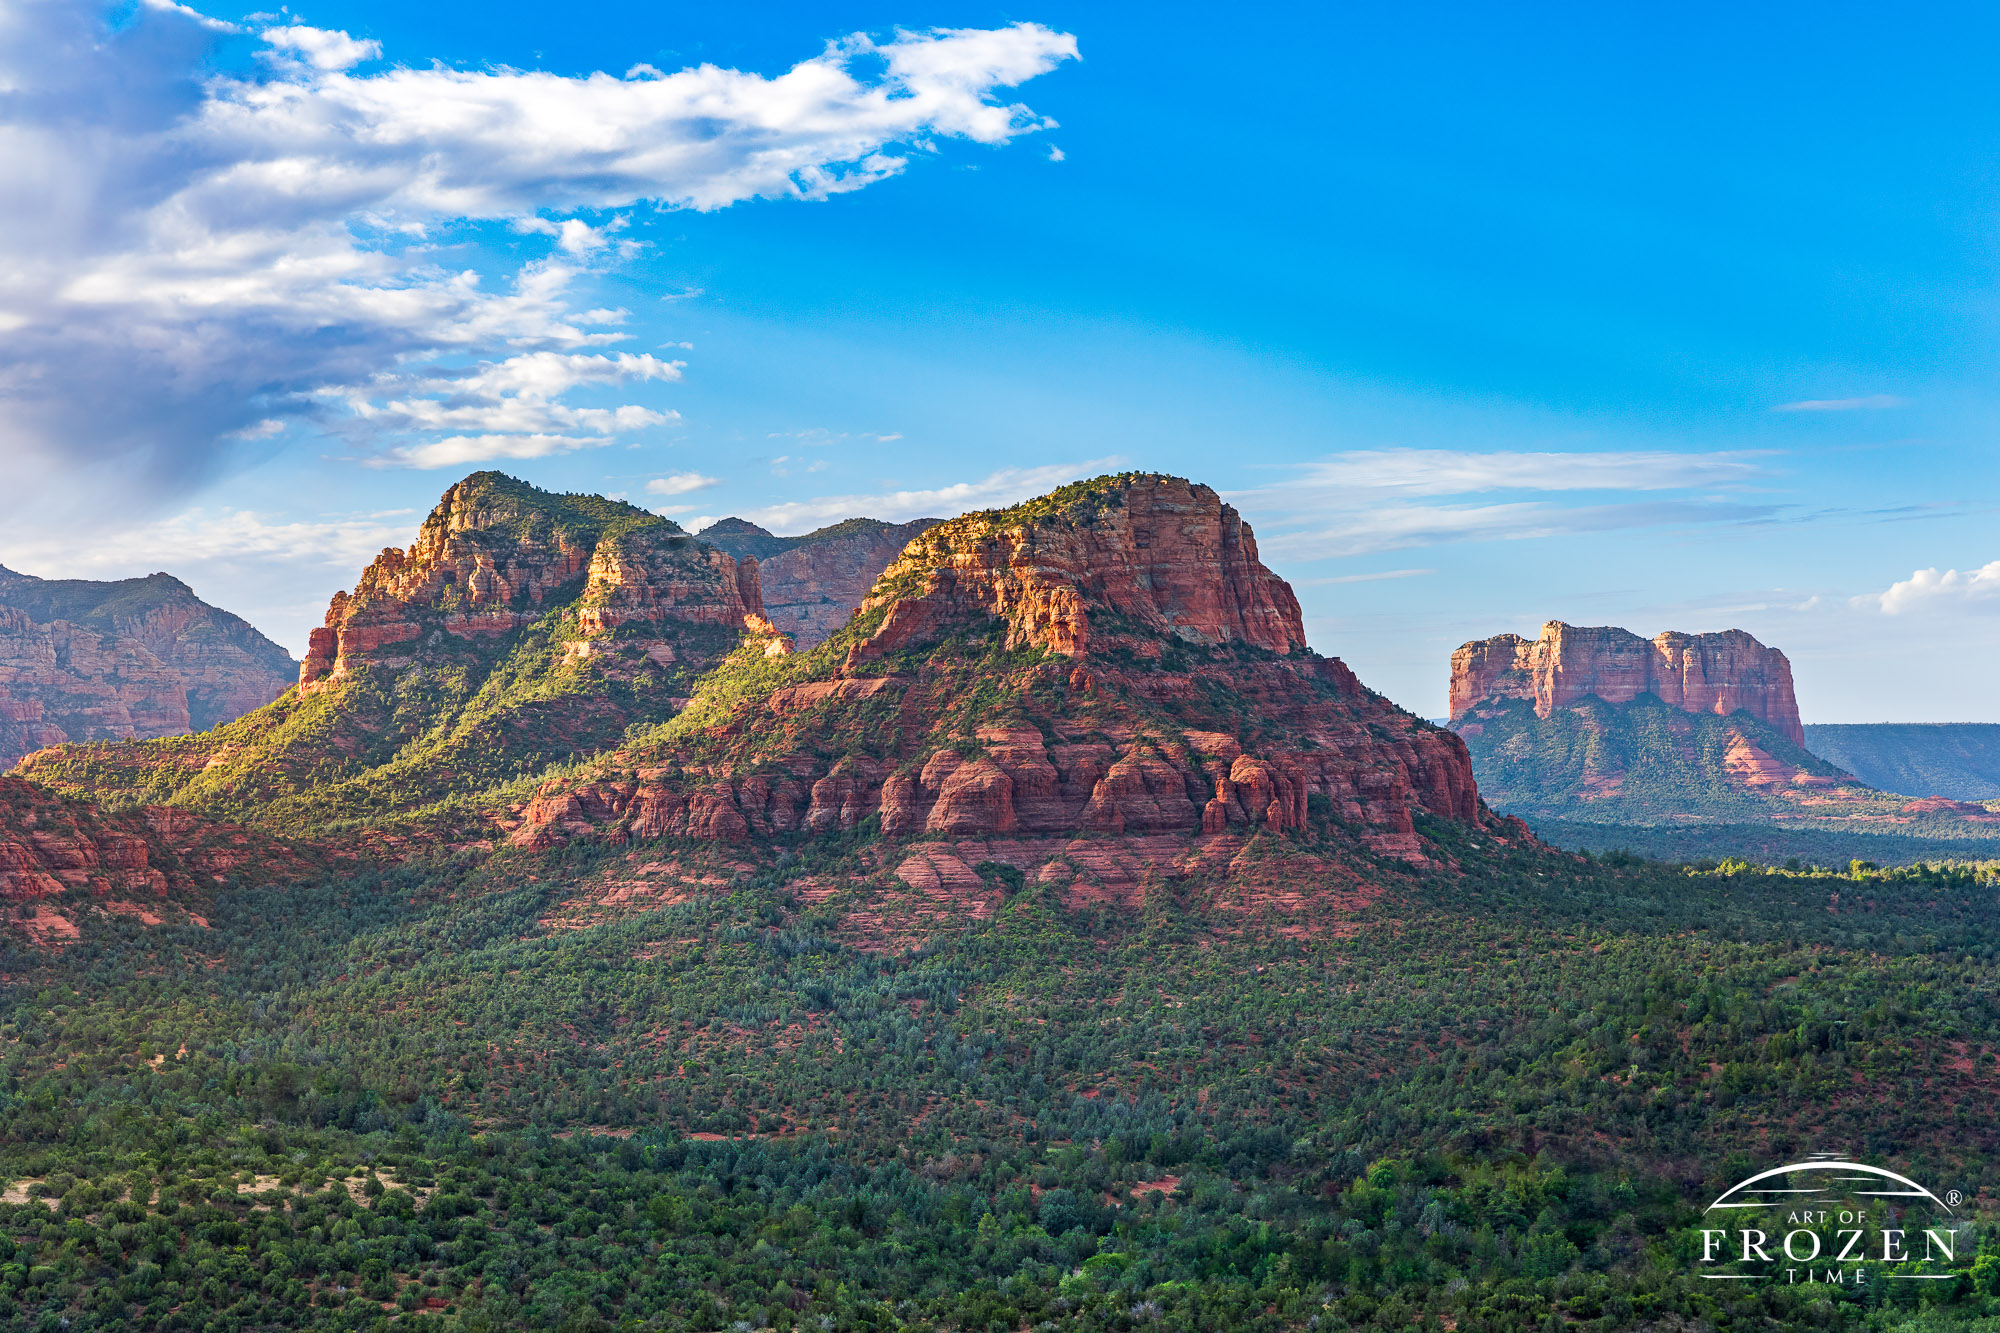 A morning view of Sedona, Arizona’s Twin Butte where golden light washed over the red rocks of the Schnebly Hill Formation